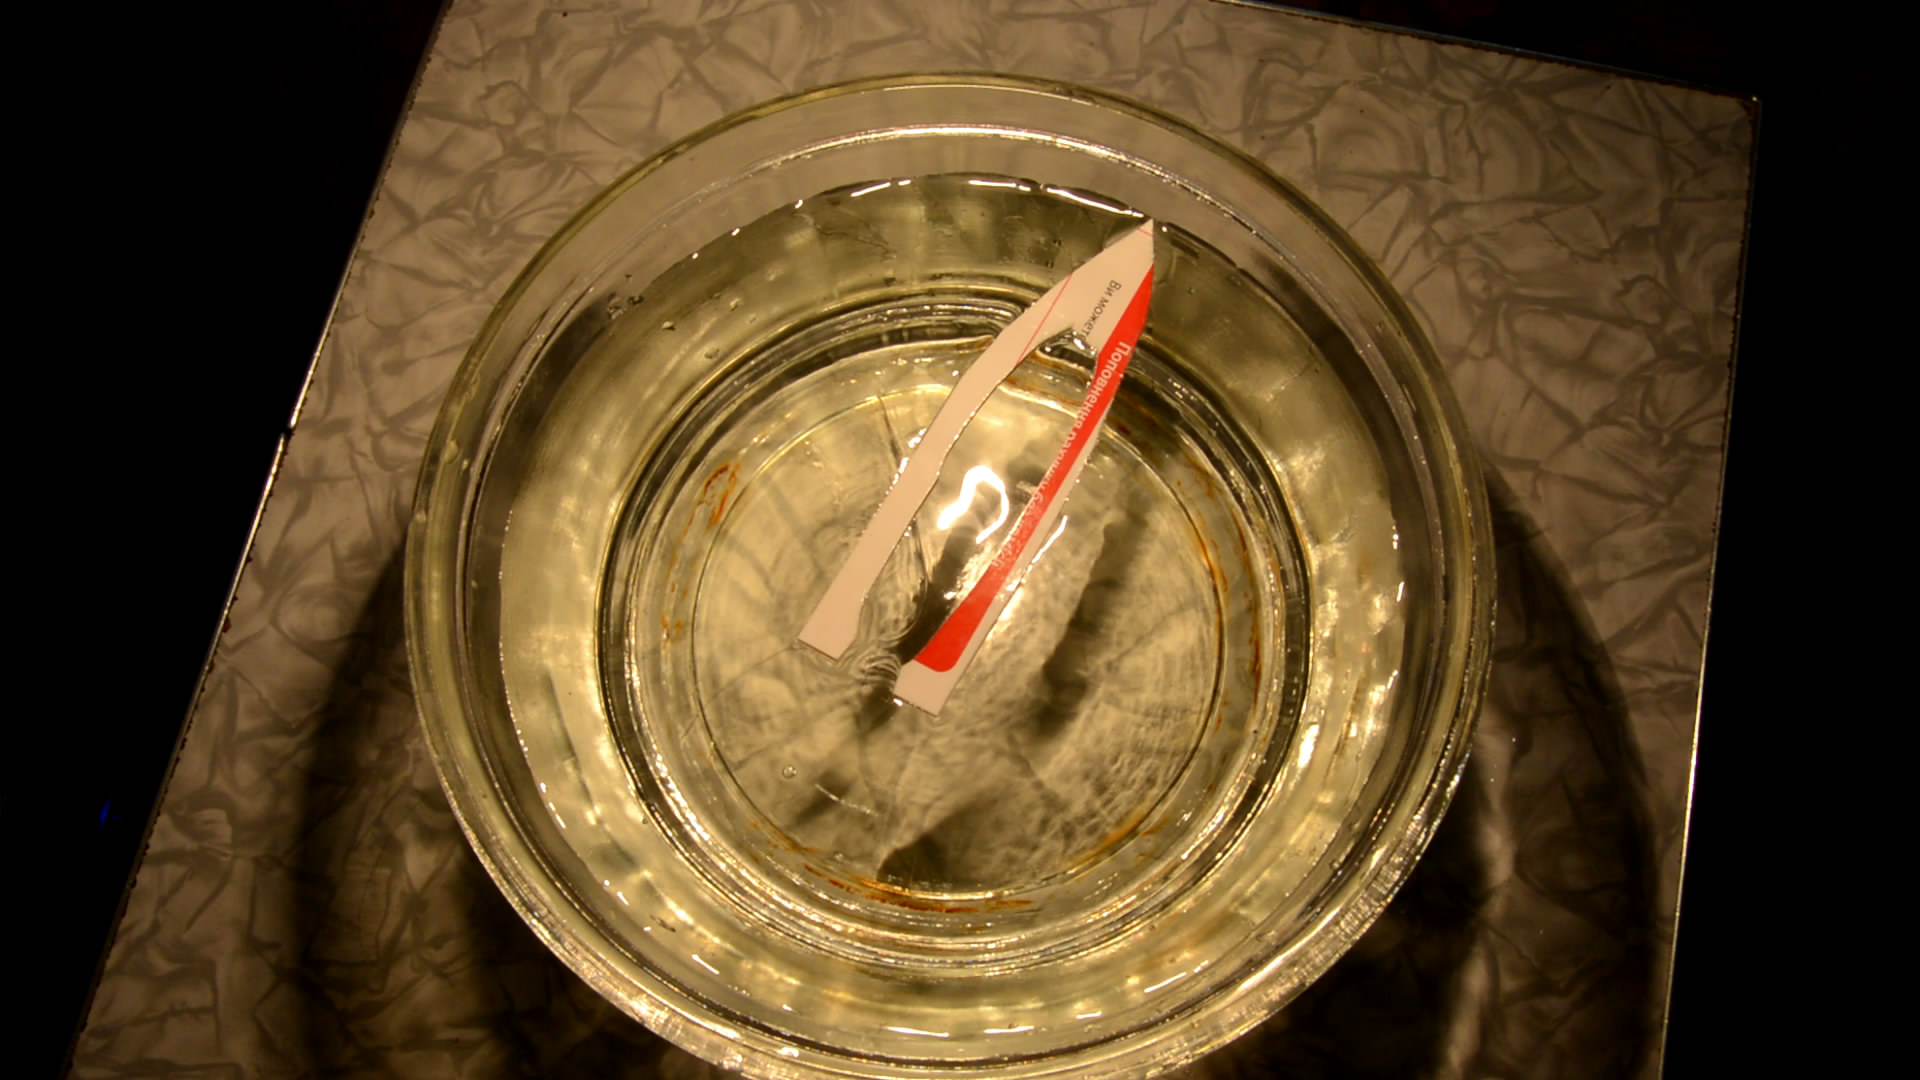    :  . Paper Fish (Surface Tension Experiment)